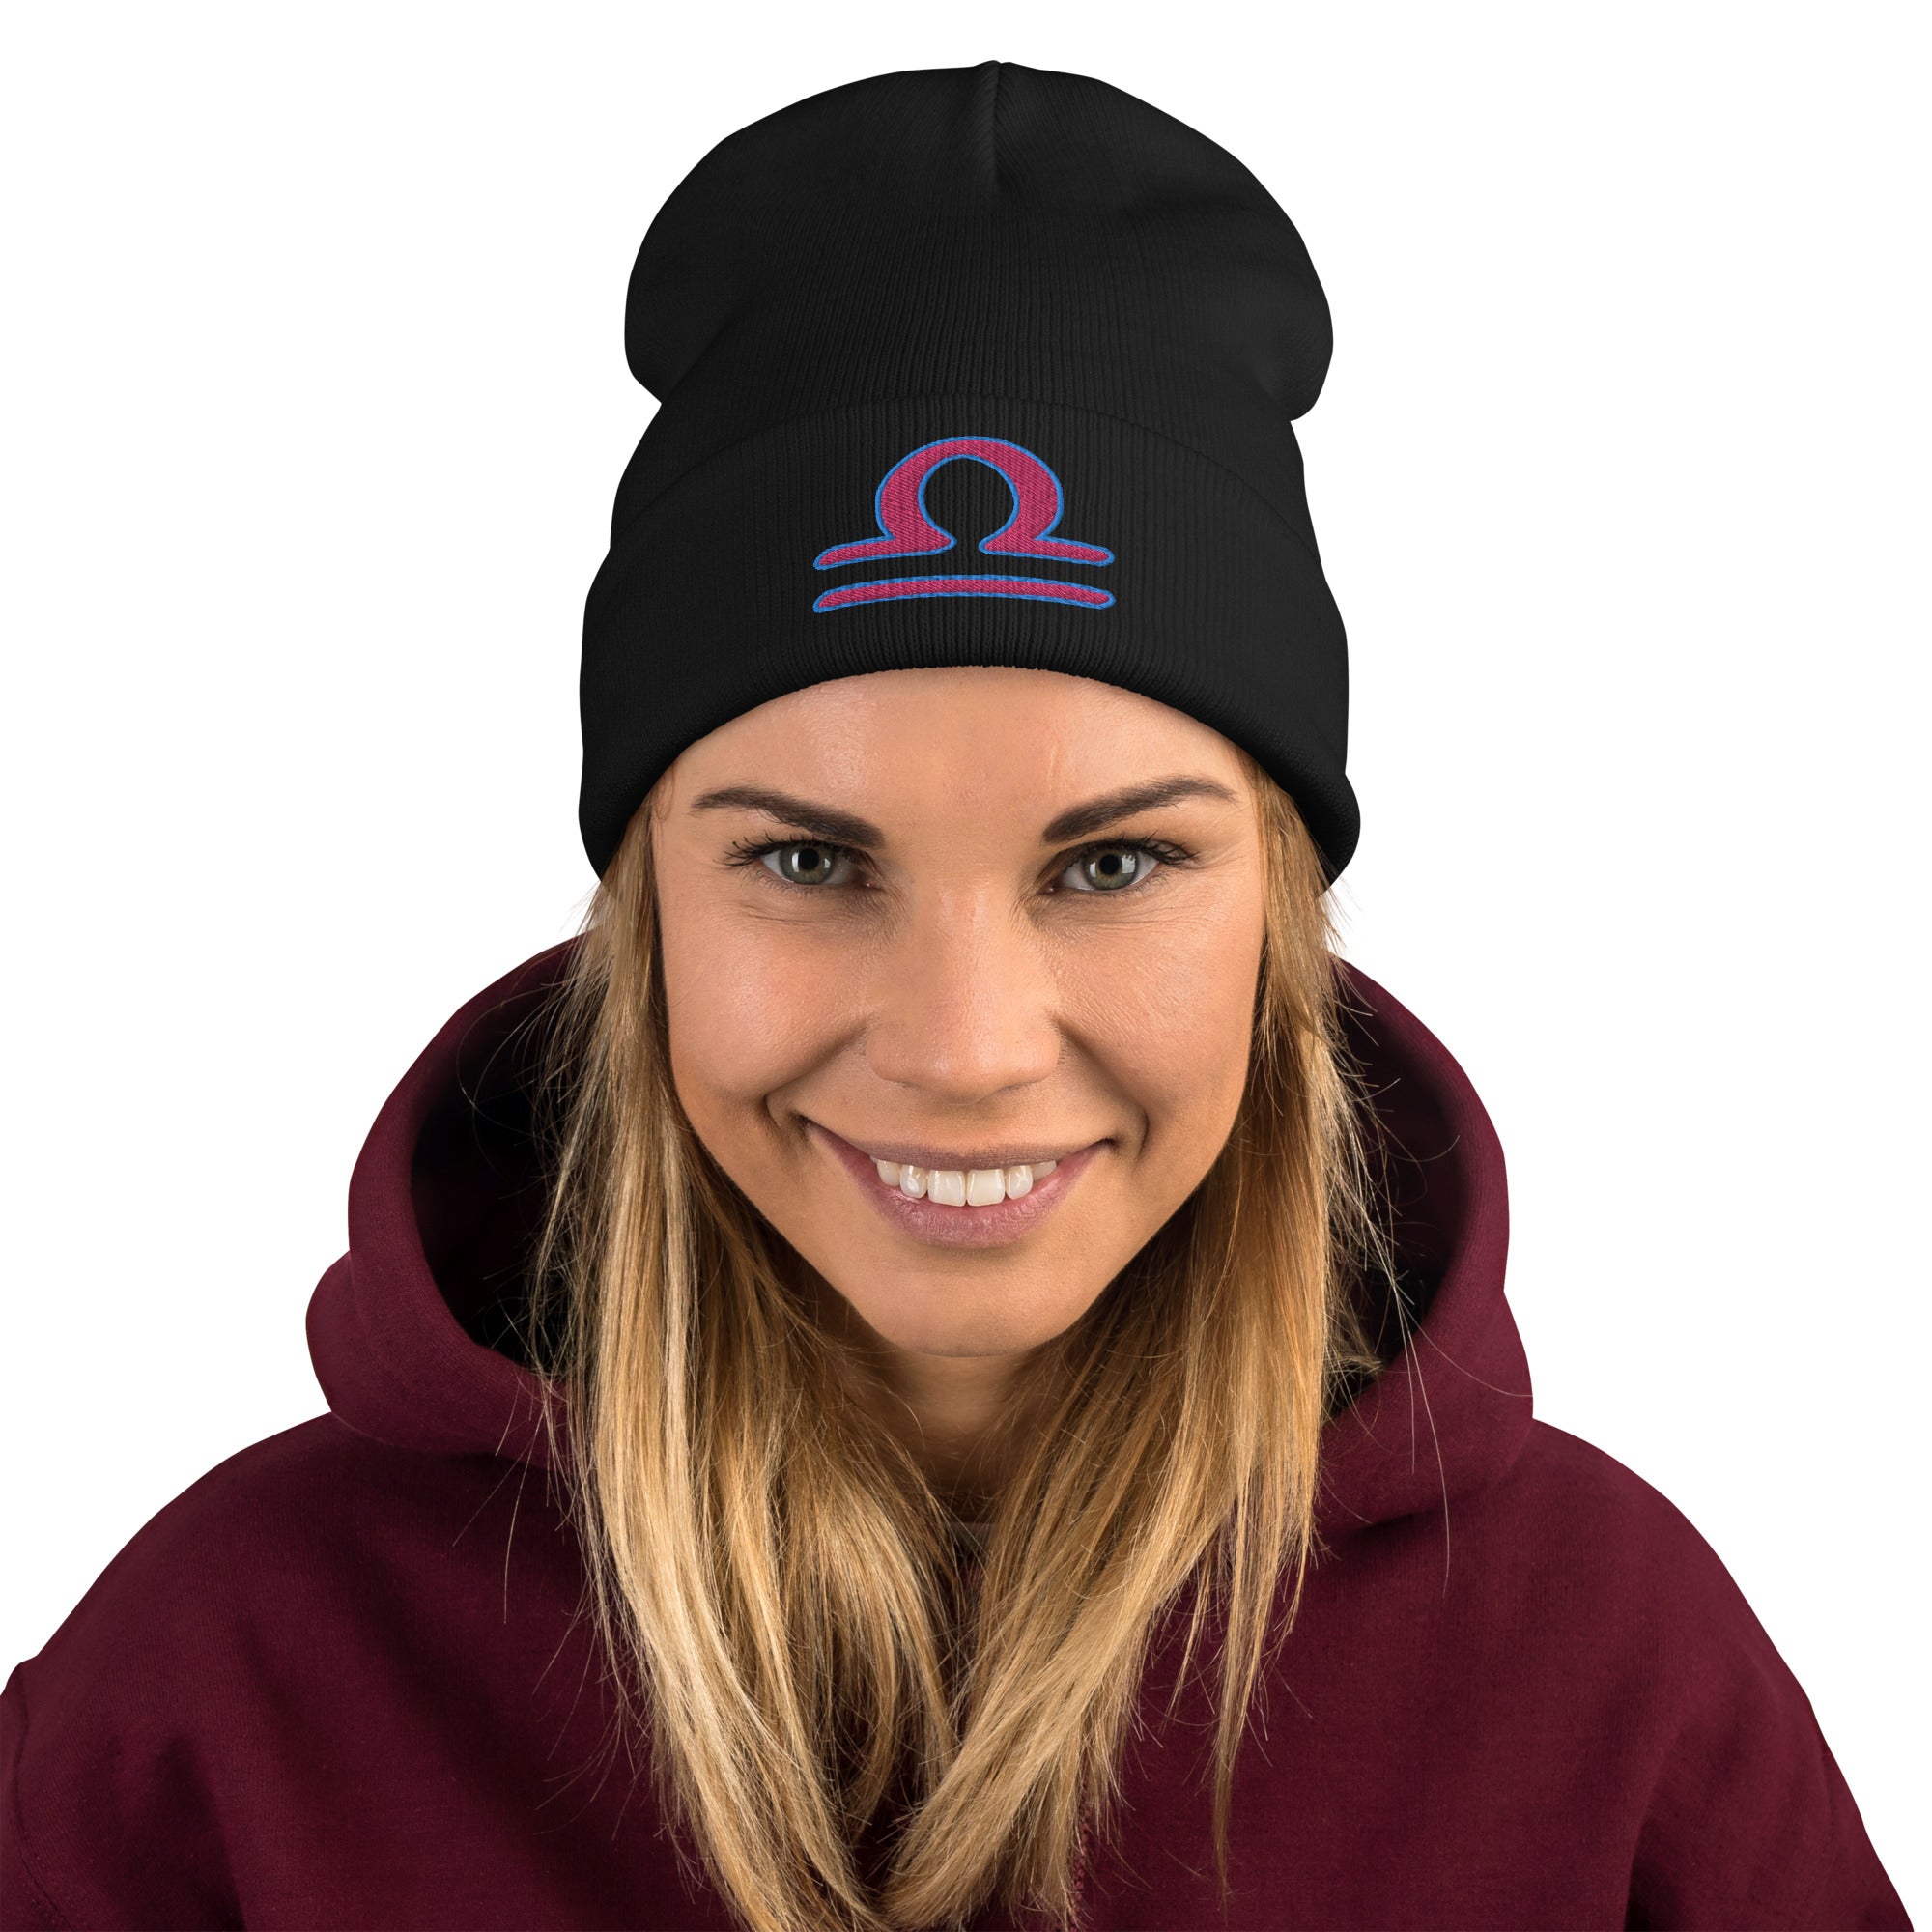 Zodiac Sign Libra Embroidered Cuff Beanie Astrology Horoscope Pink Blue Thread - Edge of Life Designs